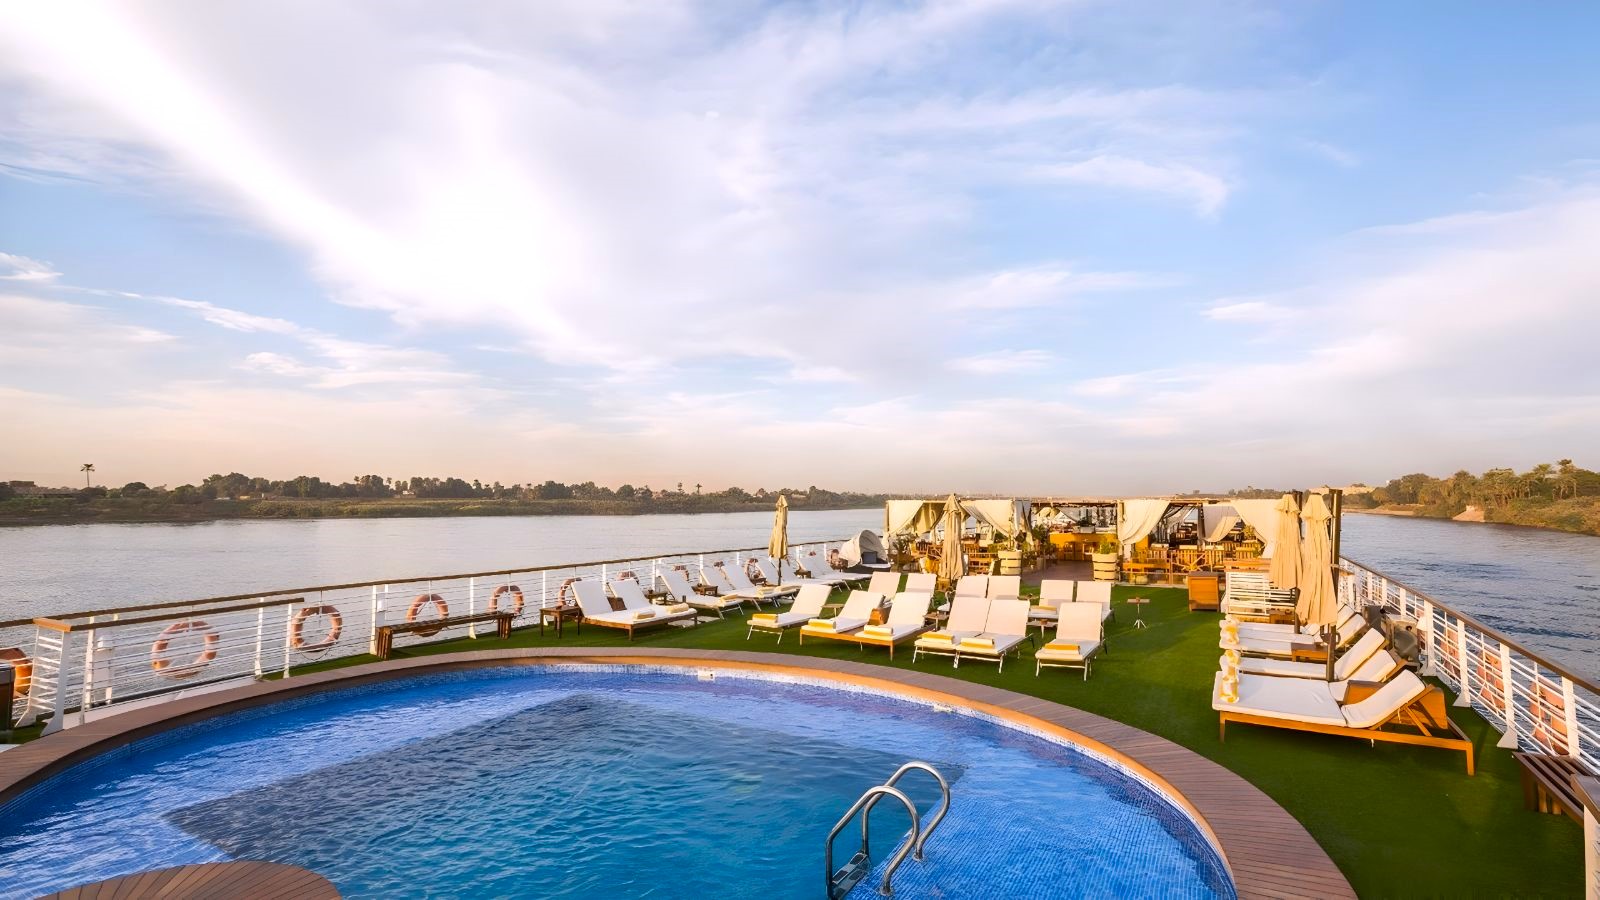 Swimming pool on the deck of Farah Nile Cruise in Egypt